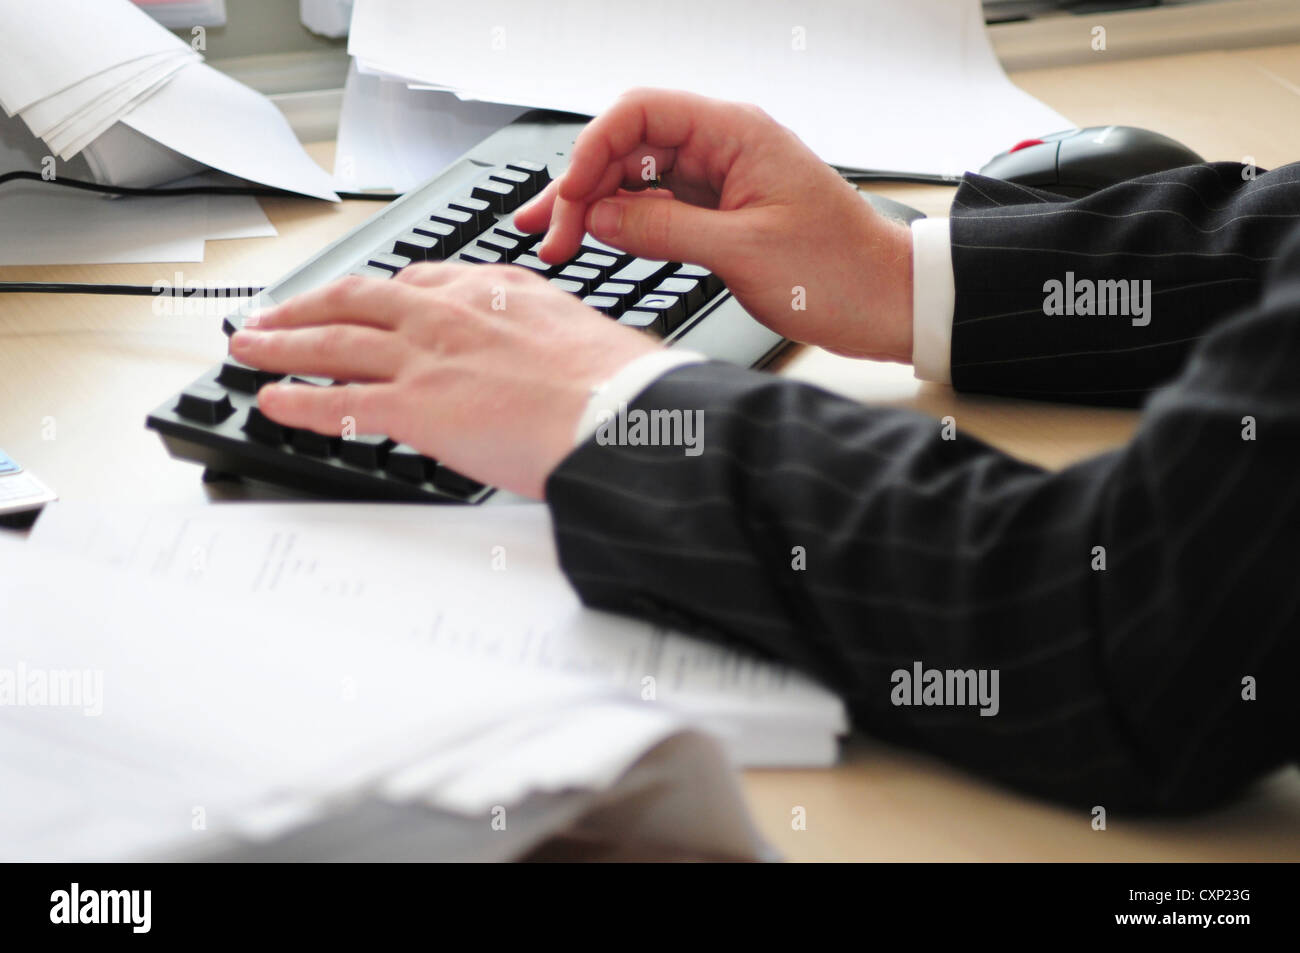 Computer keyboard on a busy office desk with selectivly focused male hands in pinstripe suit typing surrounded by papers. Stock Photo